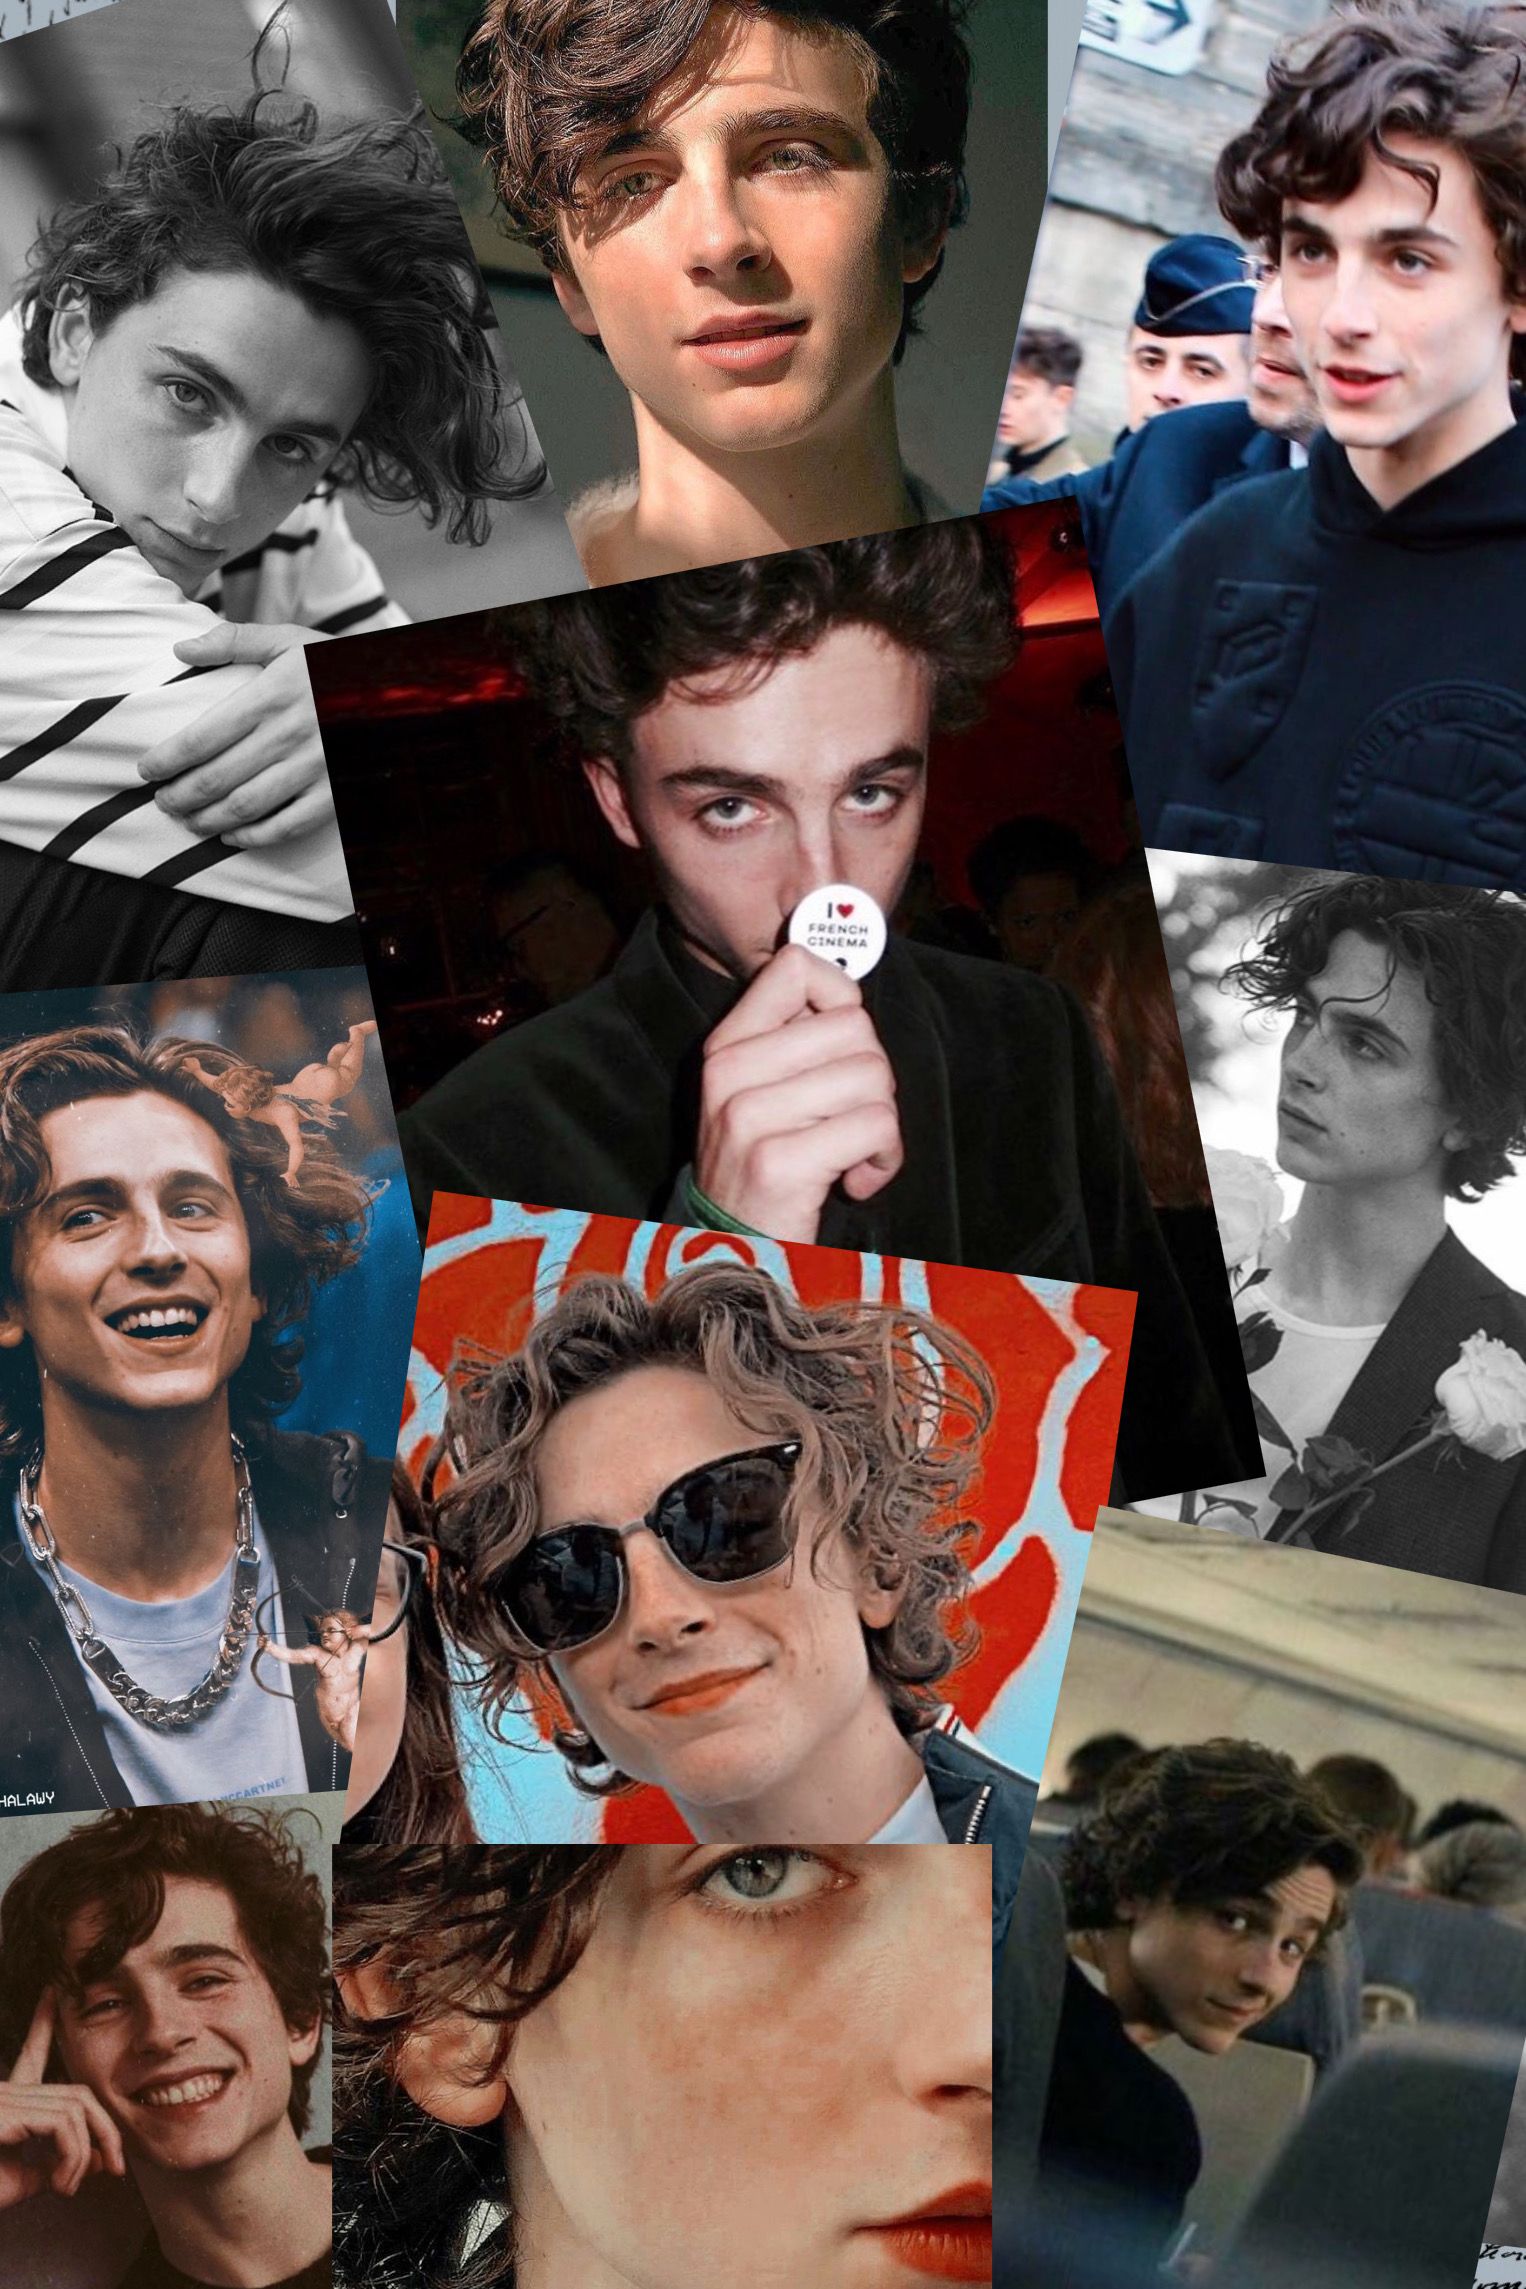 A collage of Timothee Chalamet's photos - Timothee Chalamet